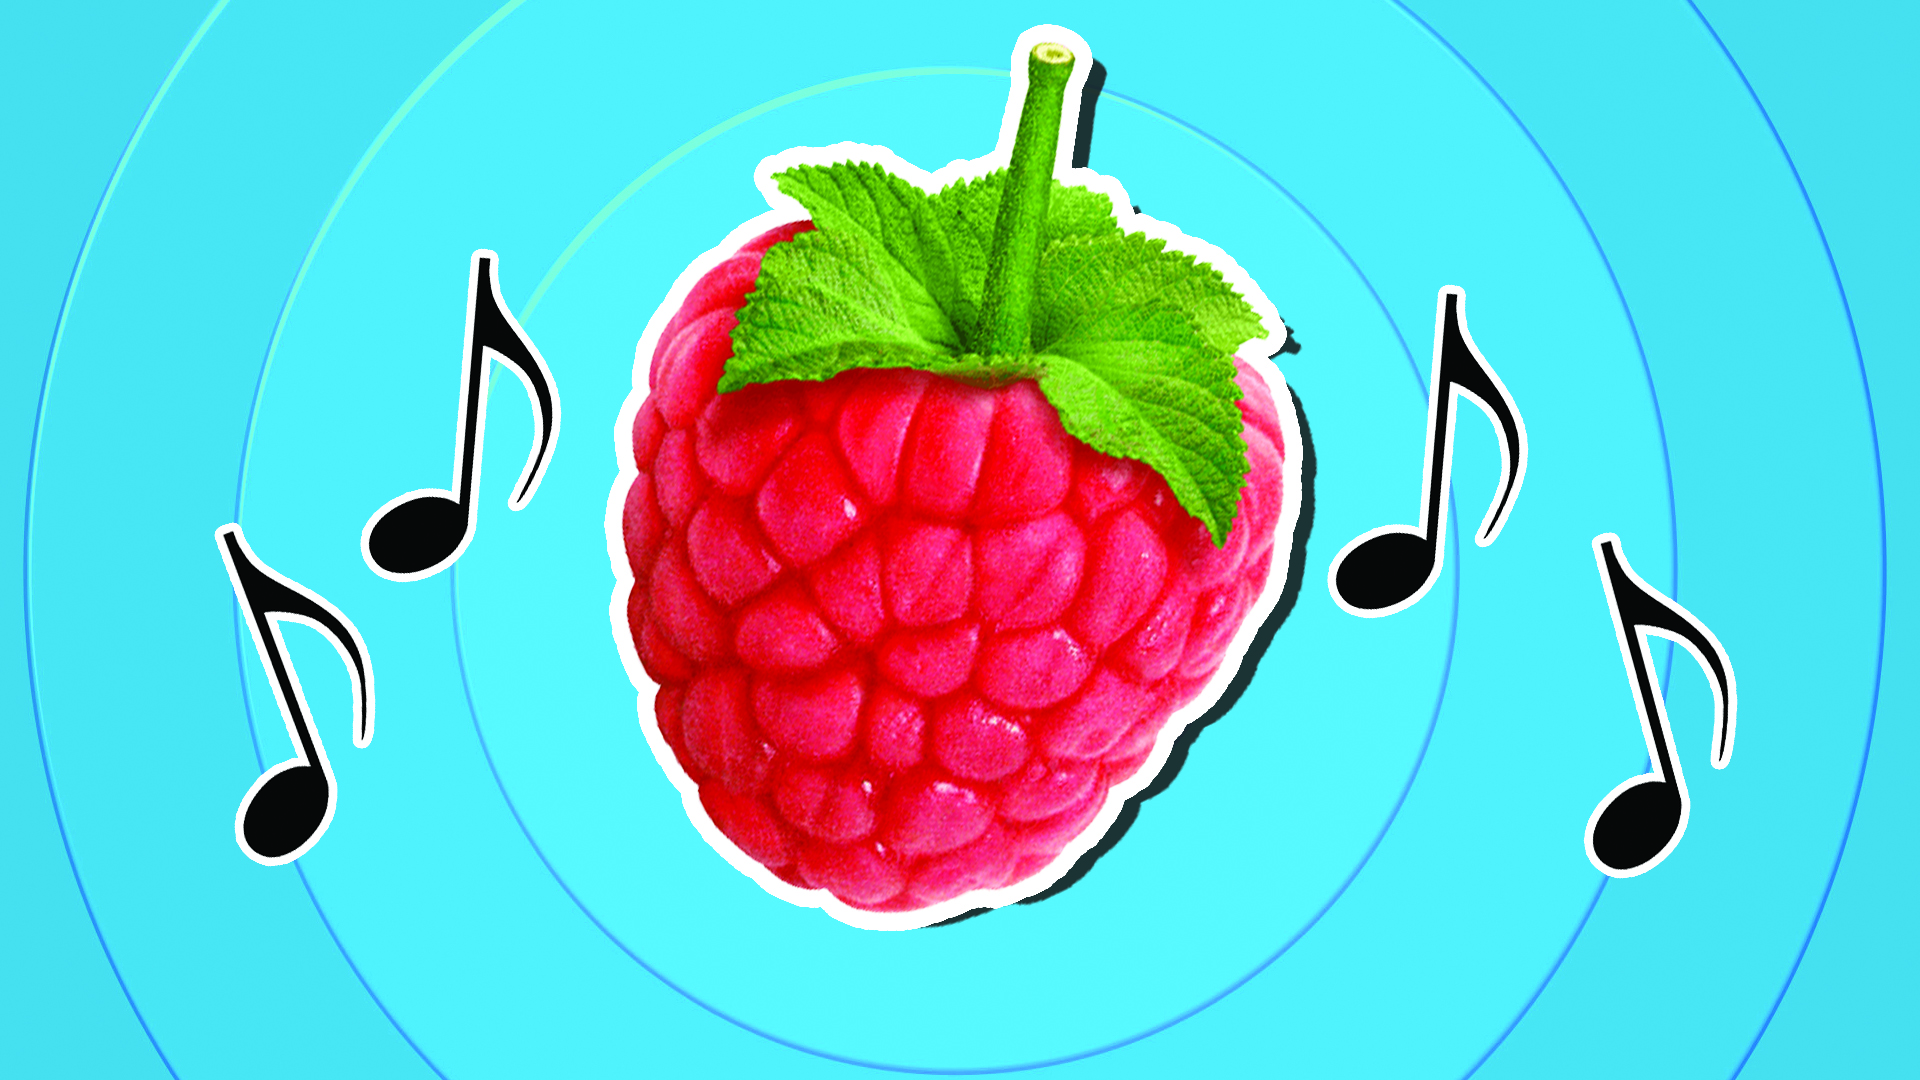 A raspberry surrounded by musical notes